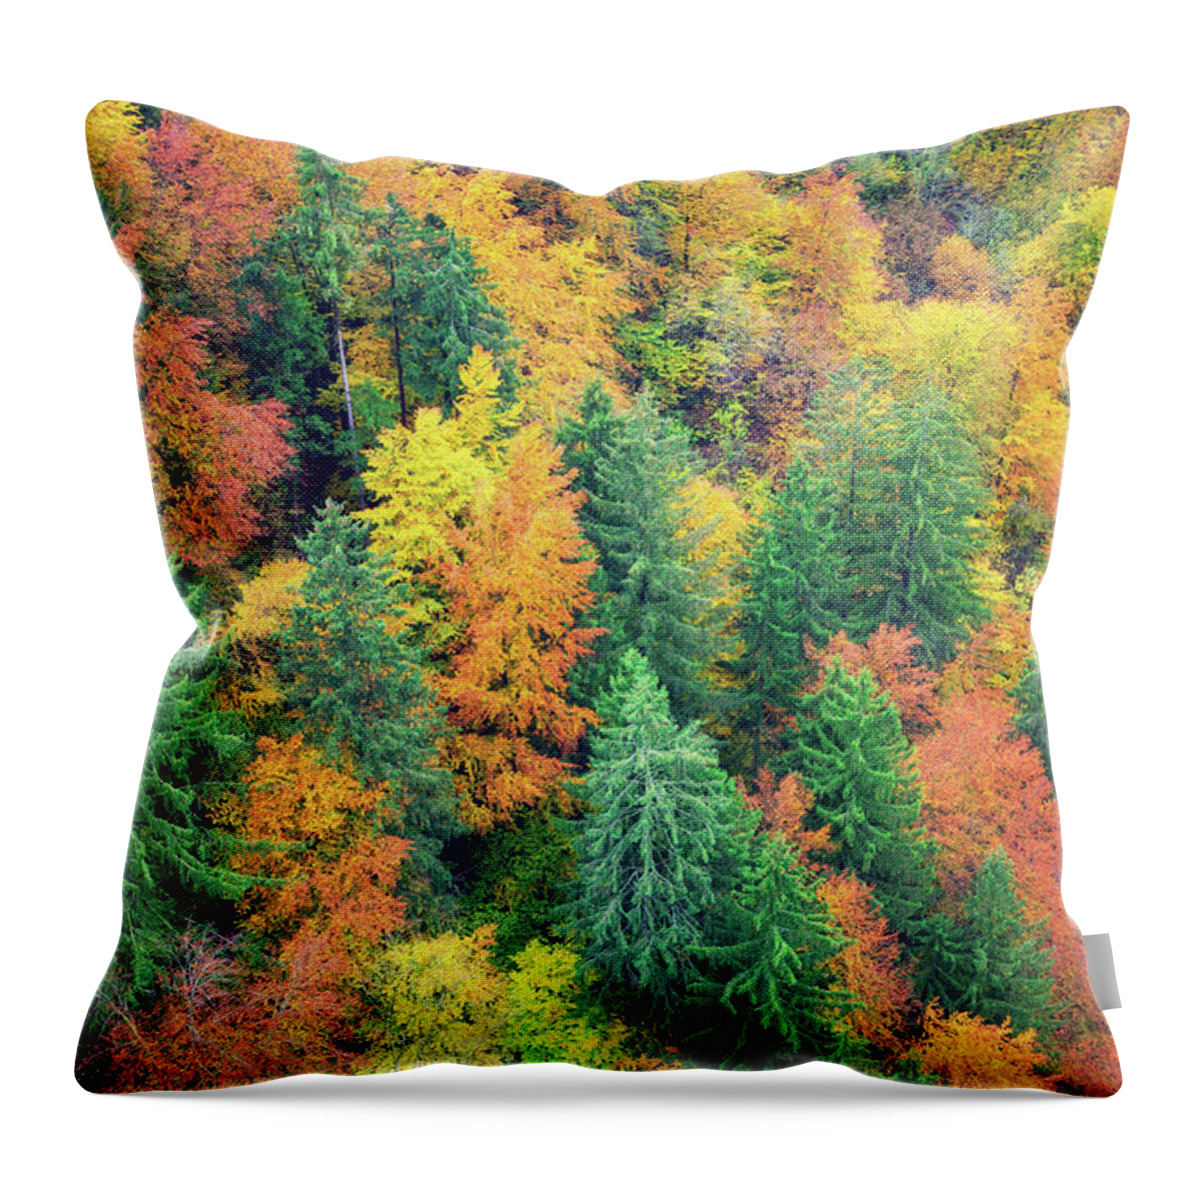 Viewpoint Throw Pillow featuring the photograph Autumn Forest by Borchee